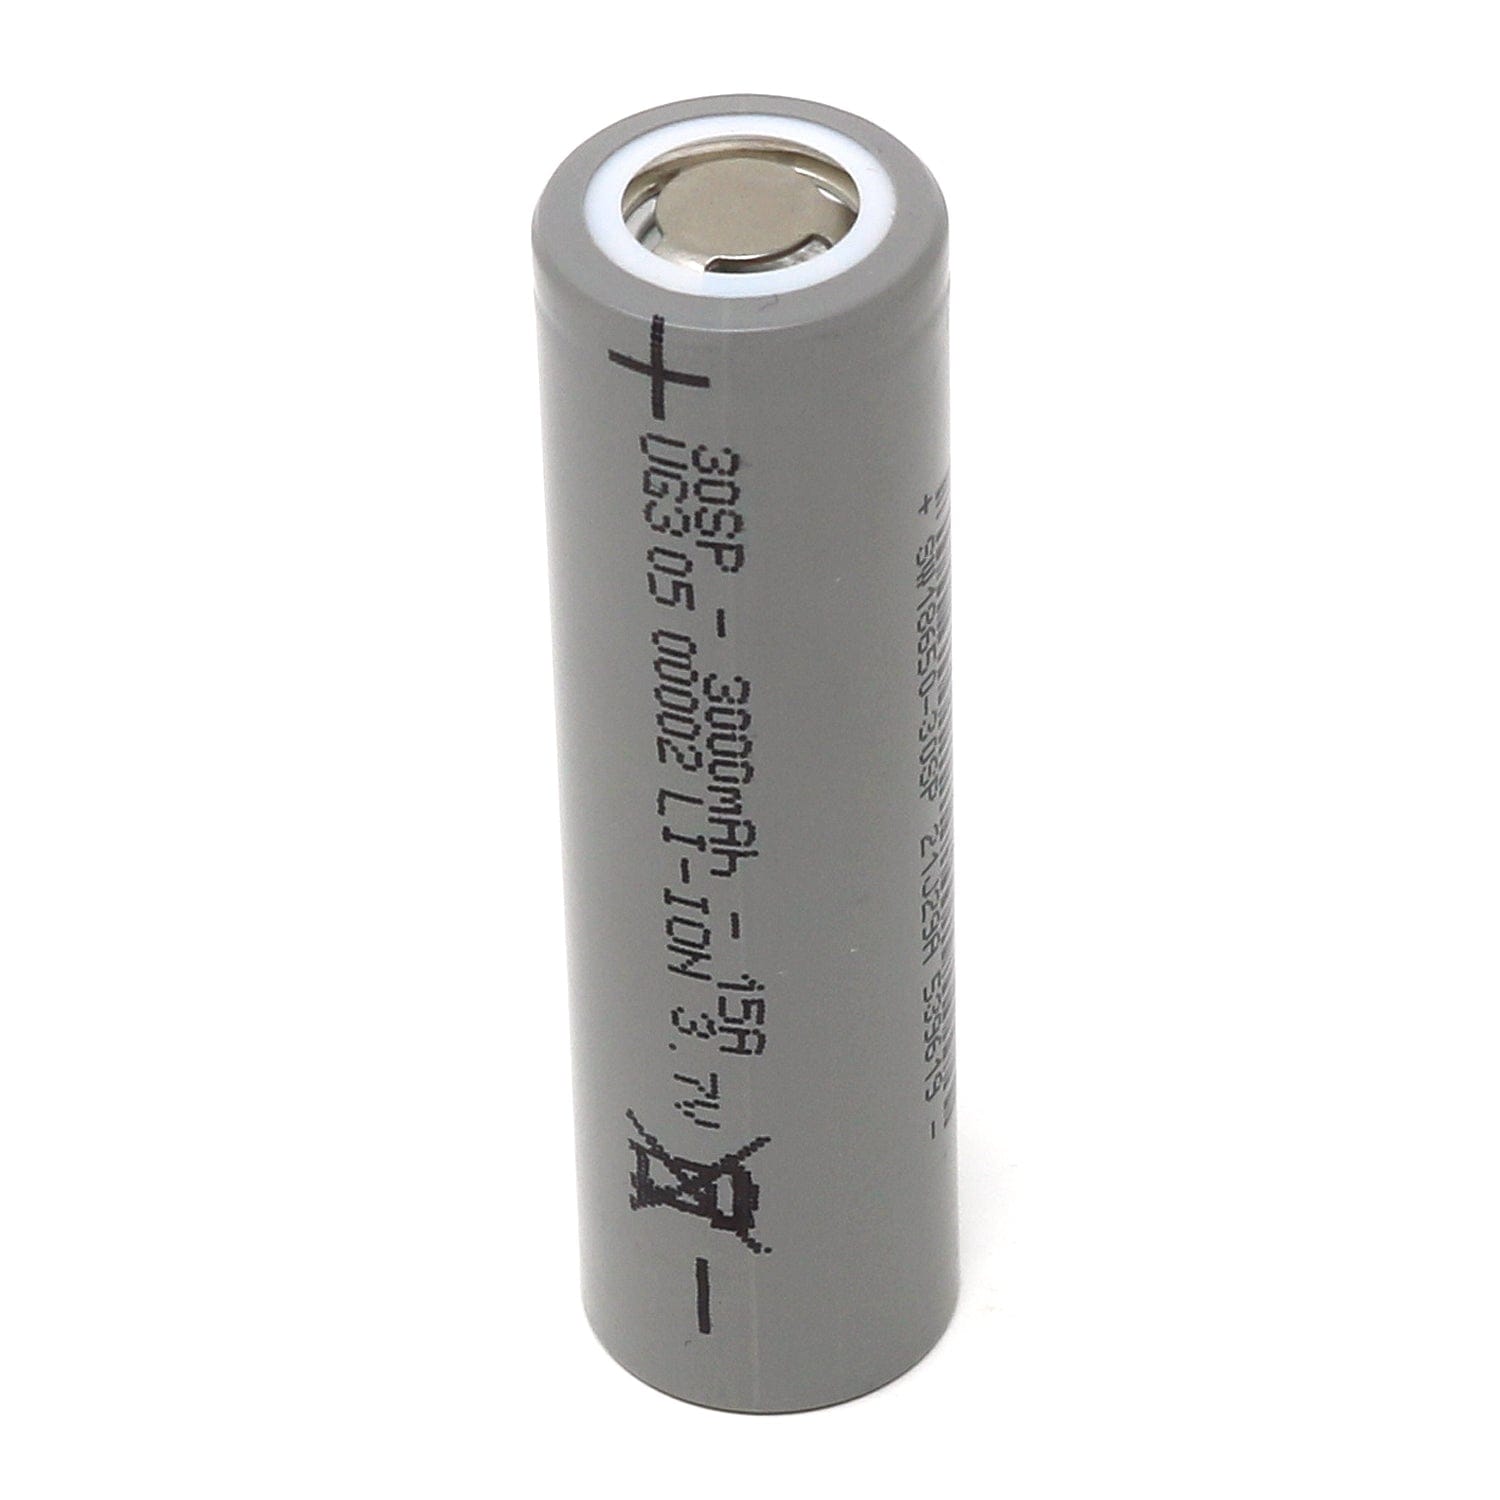 18650 Lithium-ion Rechargeable Cell - 3000mAh 3.7V 15A - The Pi Hut